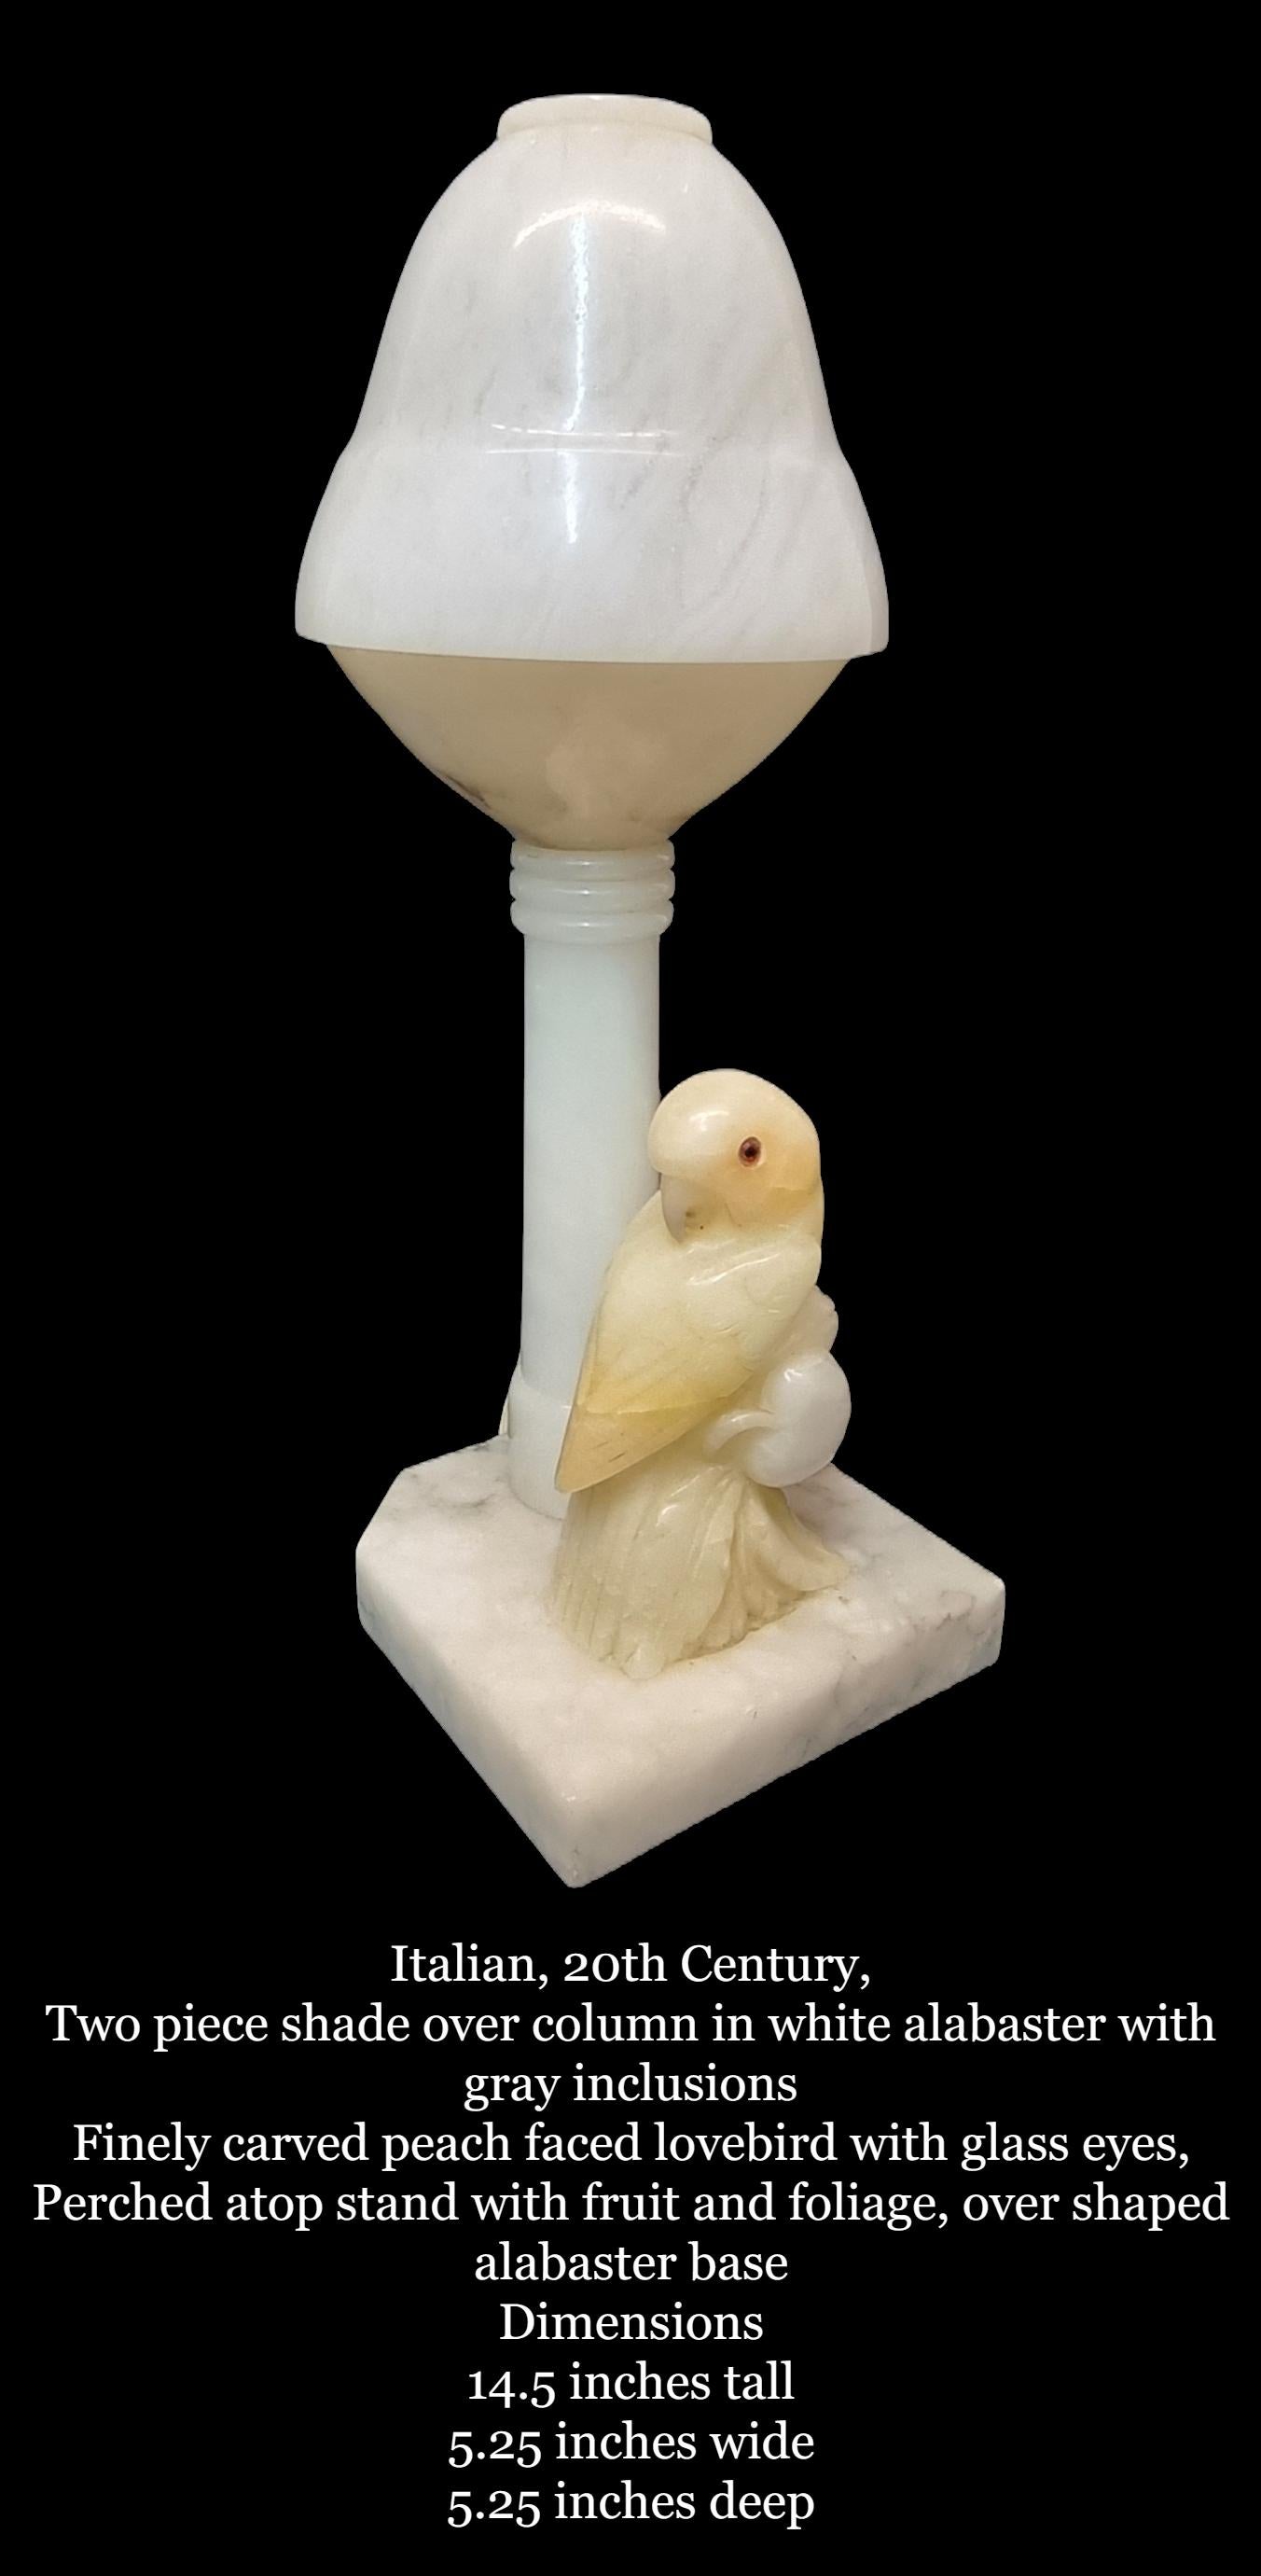 Carved Italian Alabaster Lovebird Table Lamp Italian, 20th Century

Two piece shade over column in white alabaster with gray inclusions
Finely carved peach faced lovebird with glass eyes,
Perched atop stand with fruit and foliage, over shaped